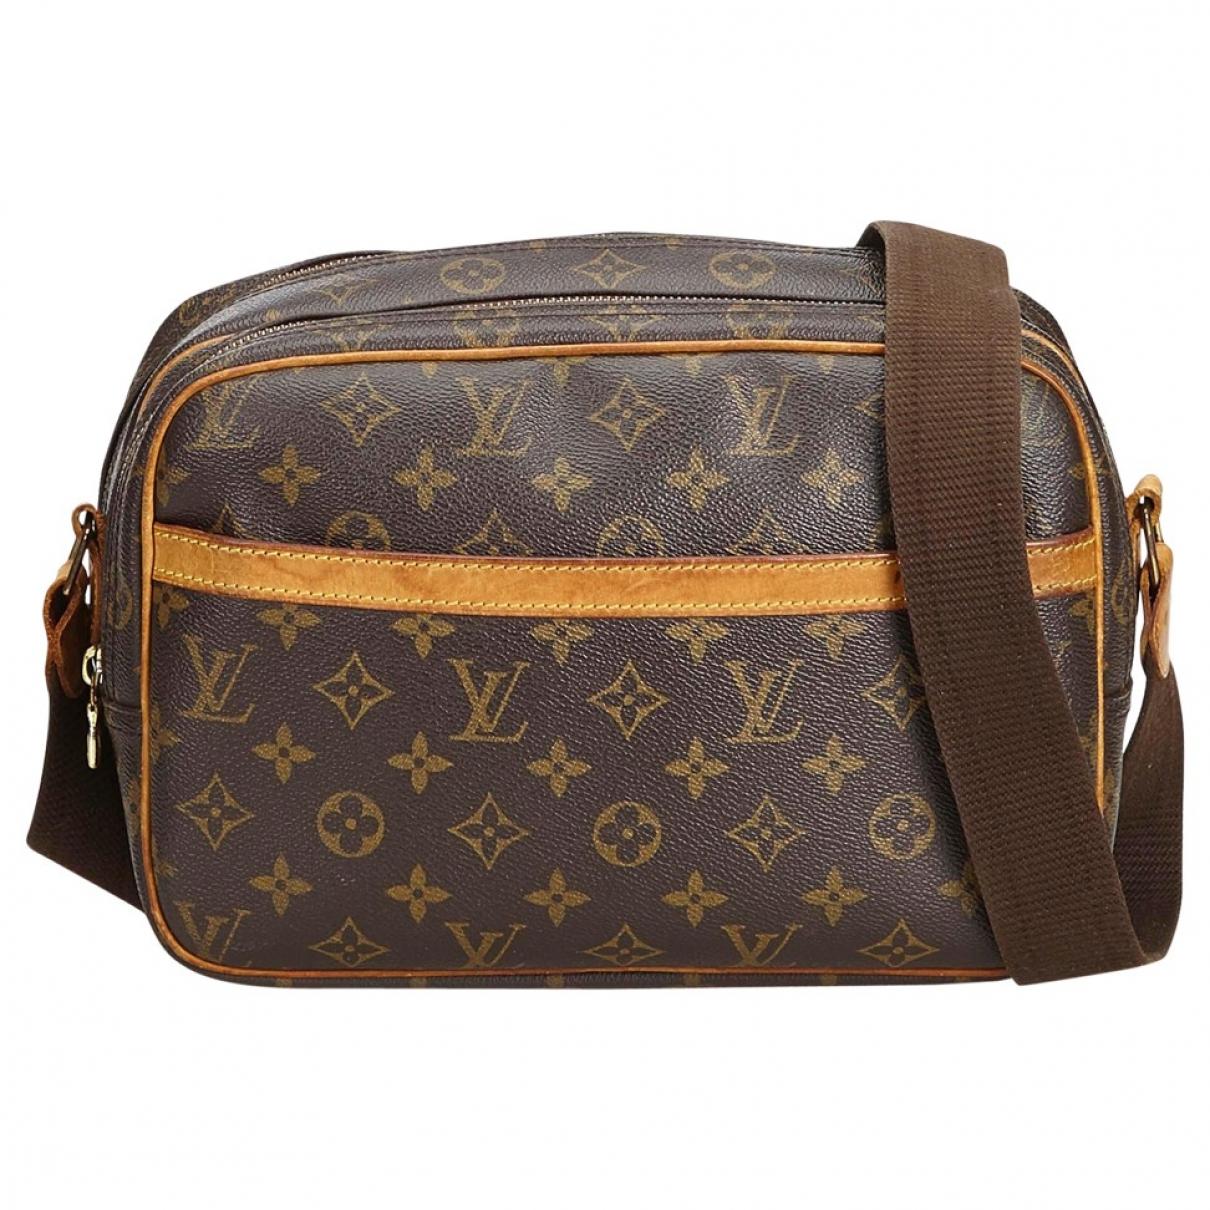 Louis Vuitton Josh Backpacks  Buy or sell your designer bags - Vestiaire  Collective